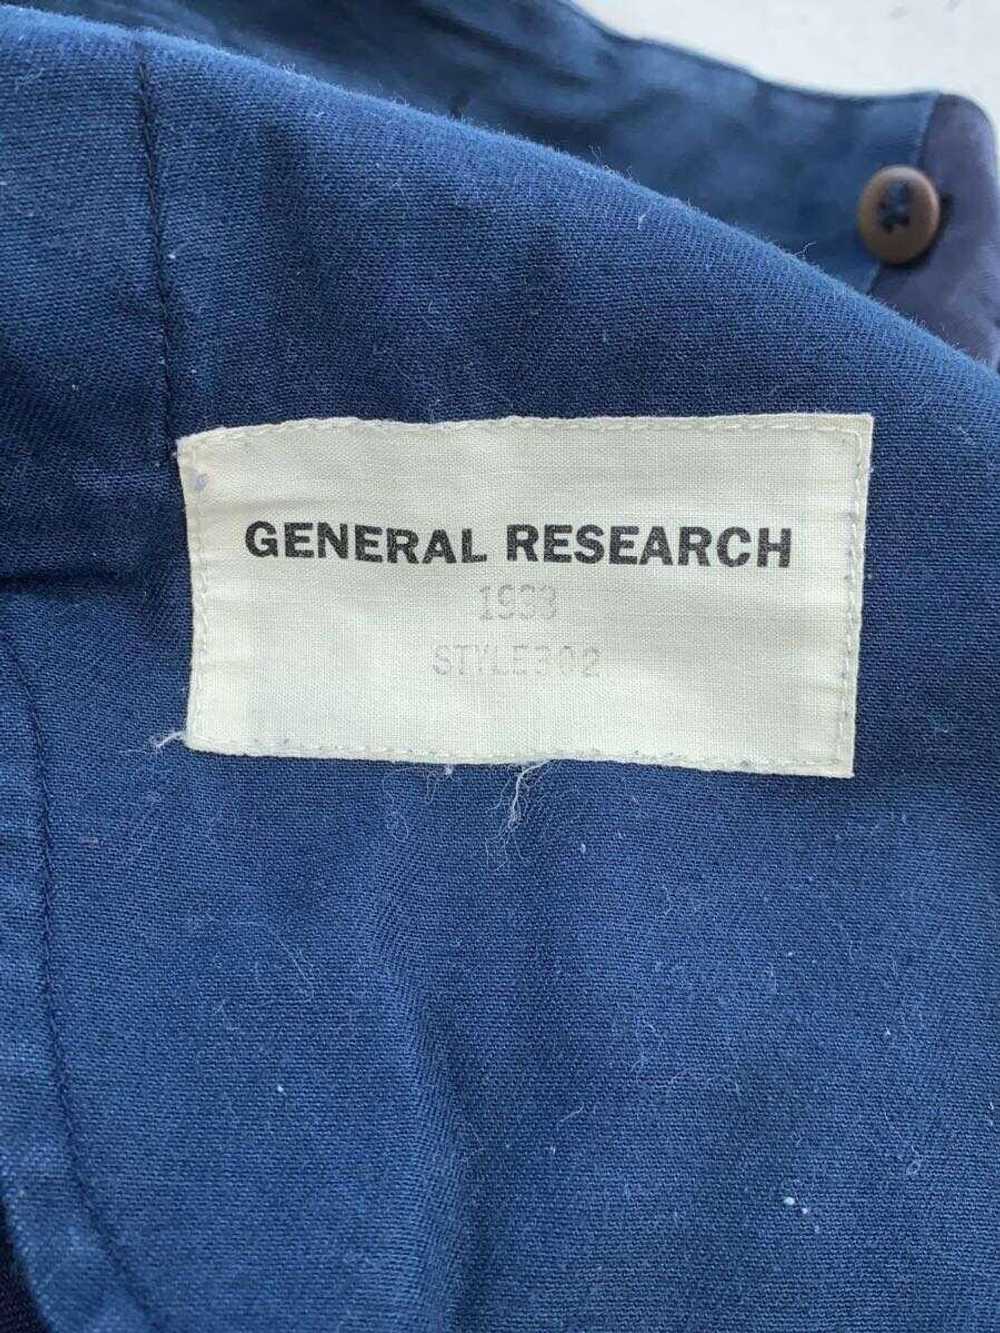 General Research 🐎 1999 Painter Pants - image 4